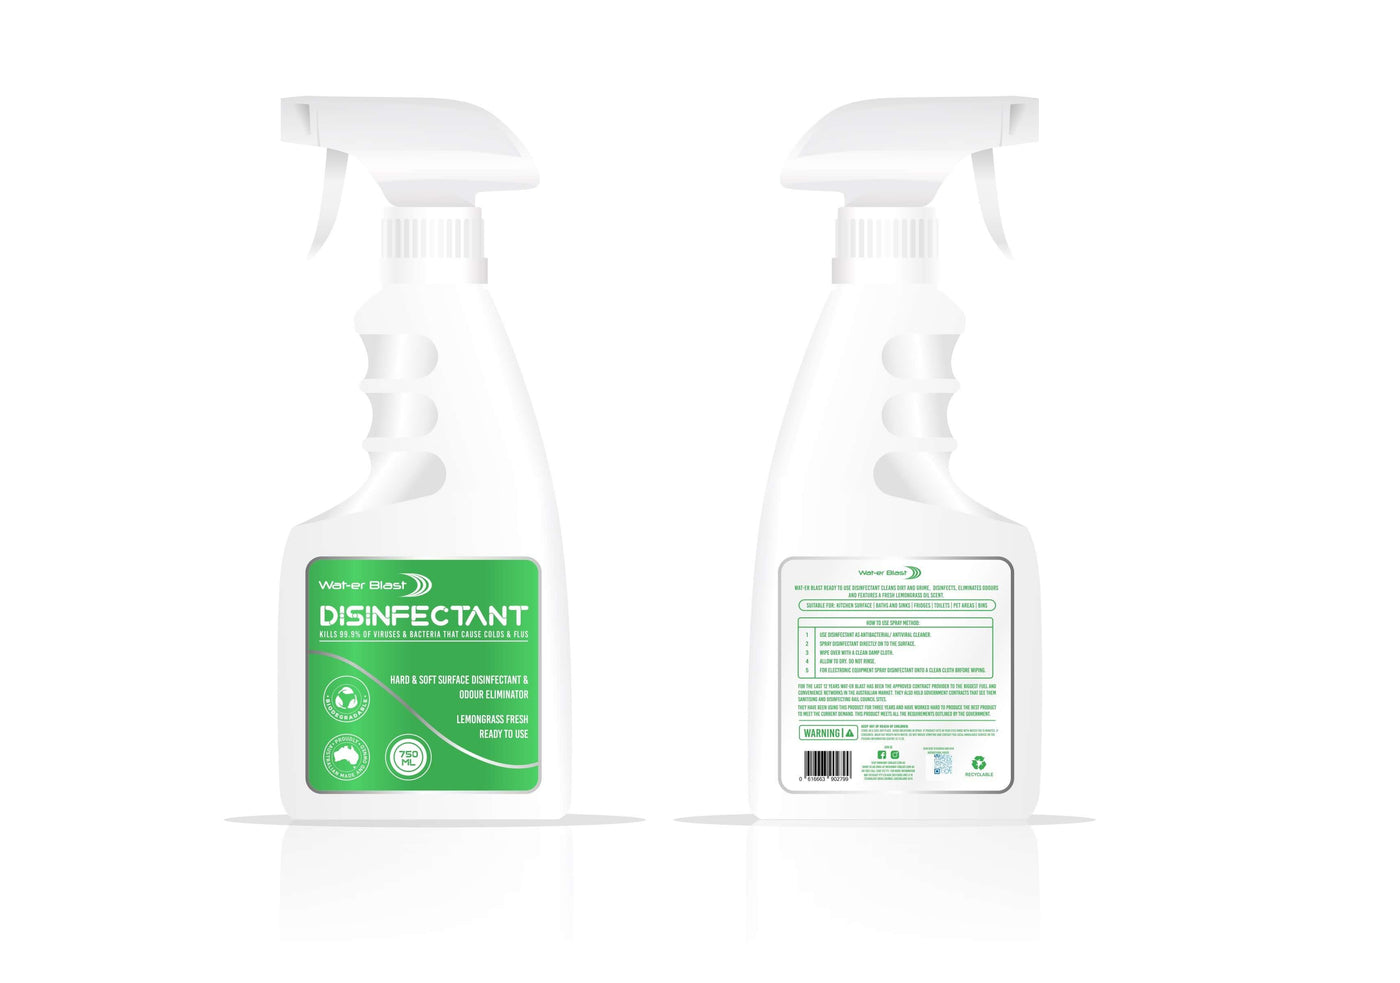 2x White Spray Bottles with Left Bottle Displaying a Green Front Label and the Right Bottle Displaying the Back White Label with Green Writing